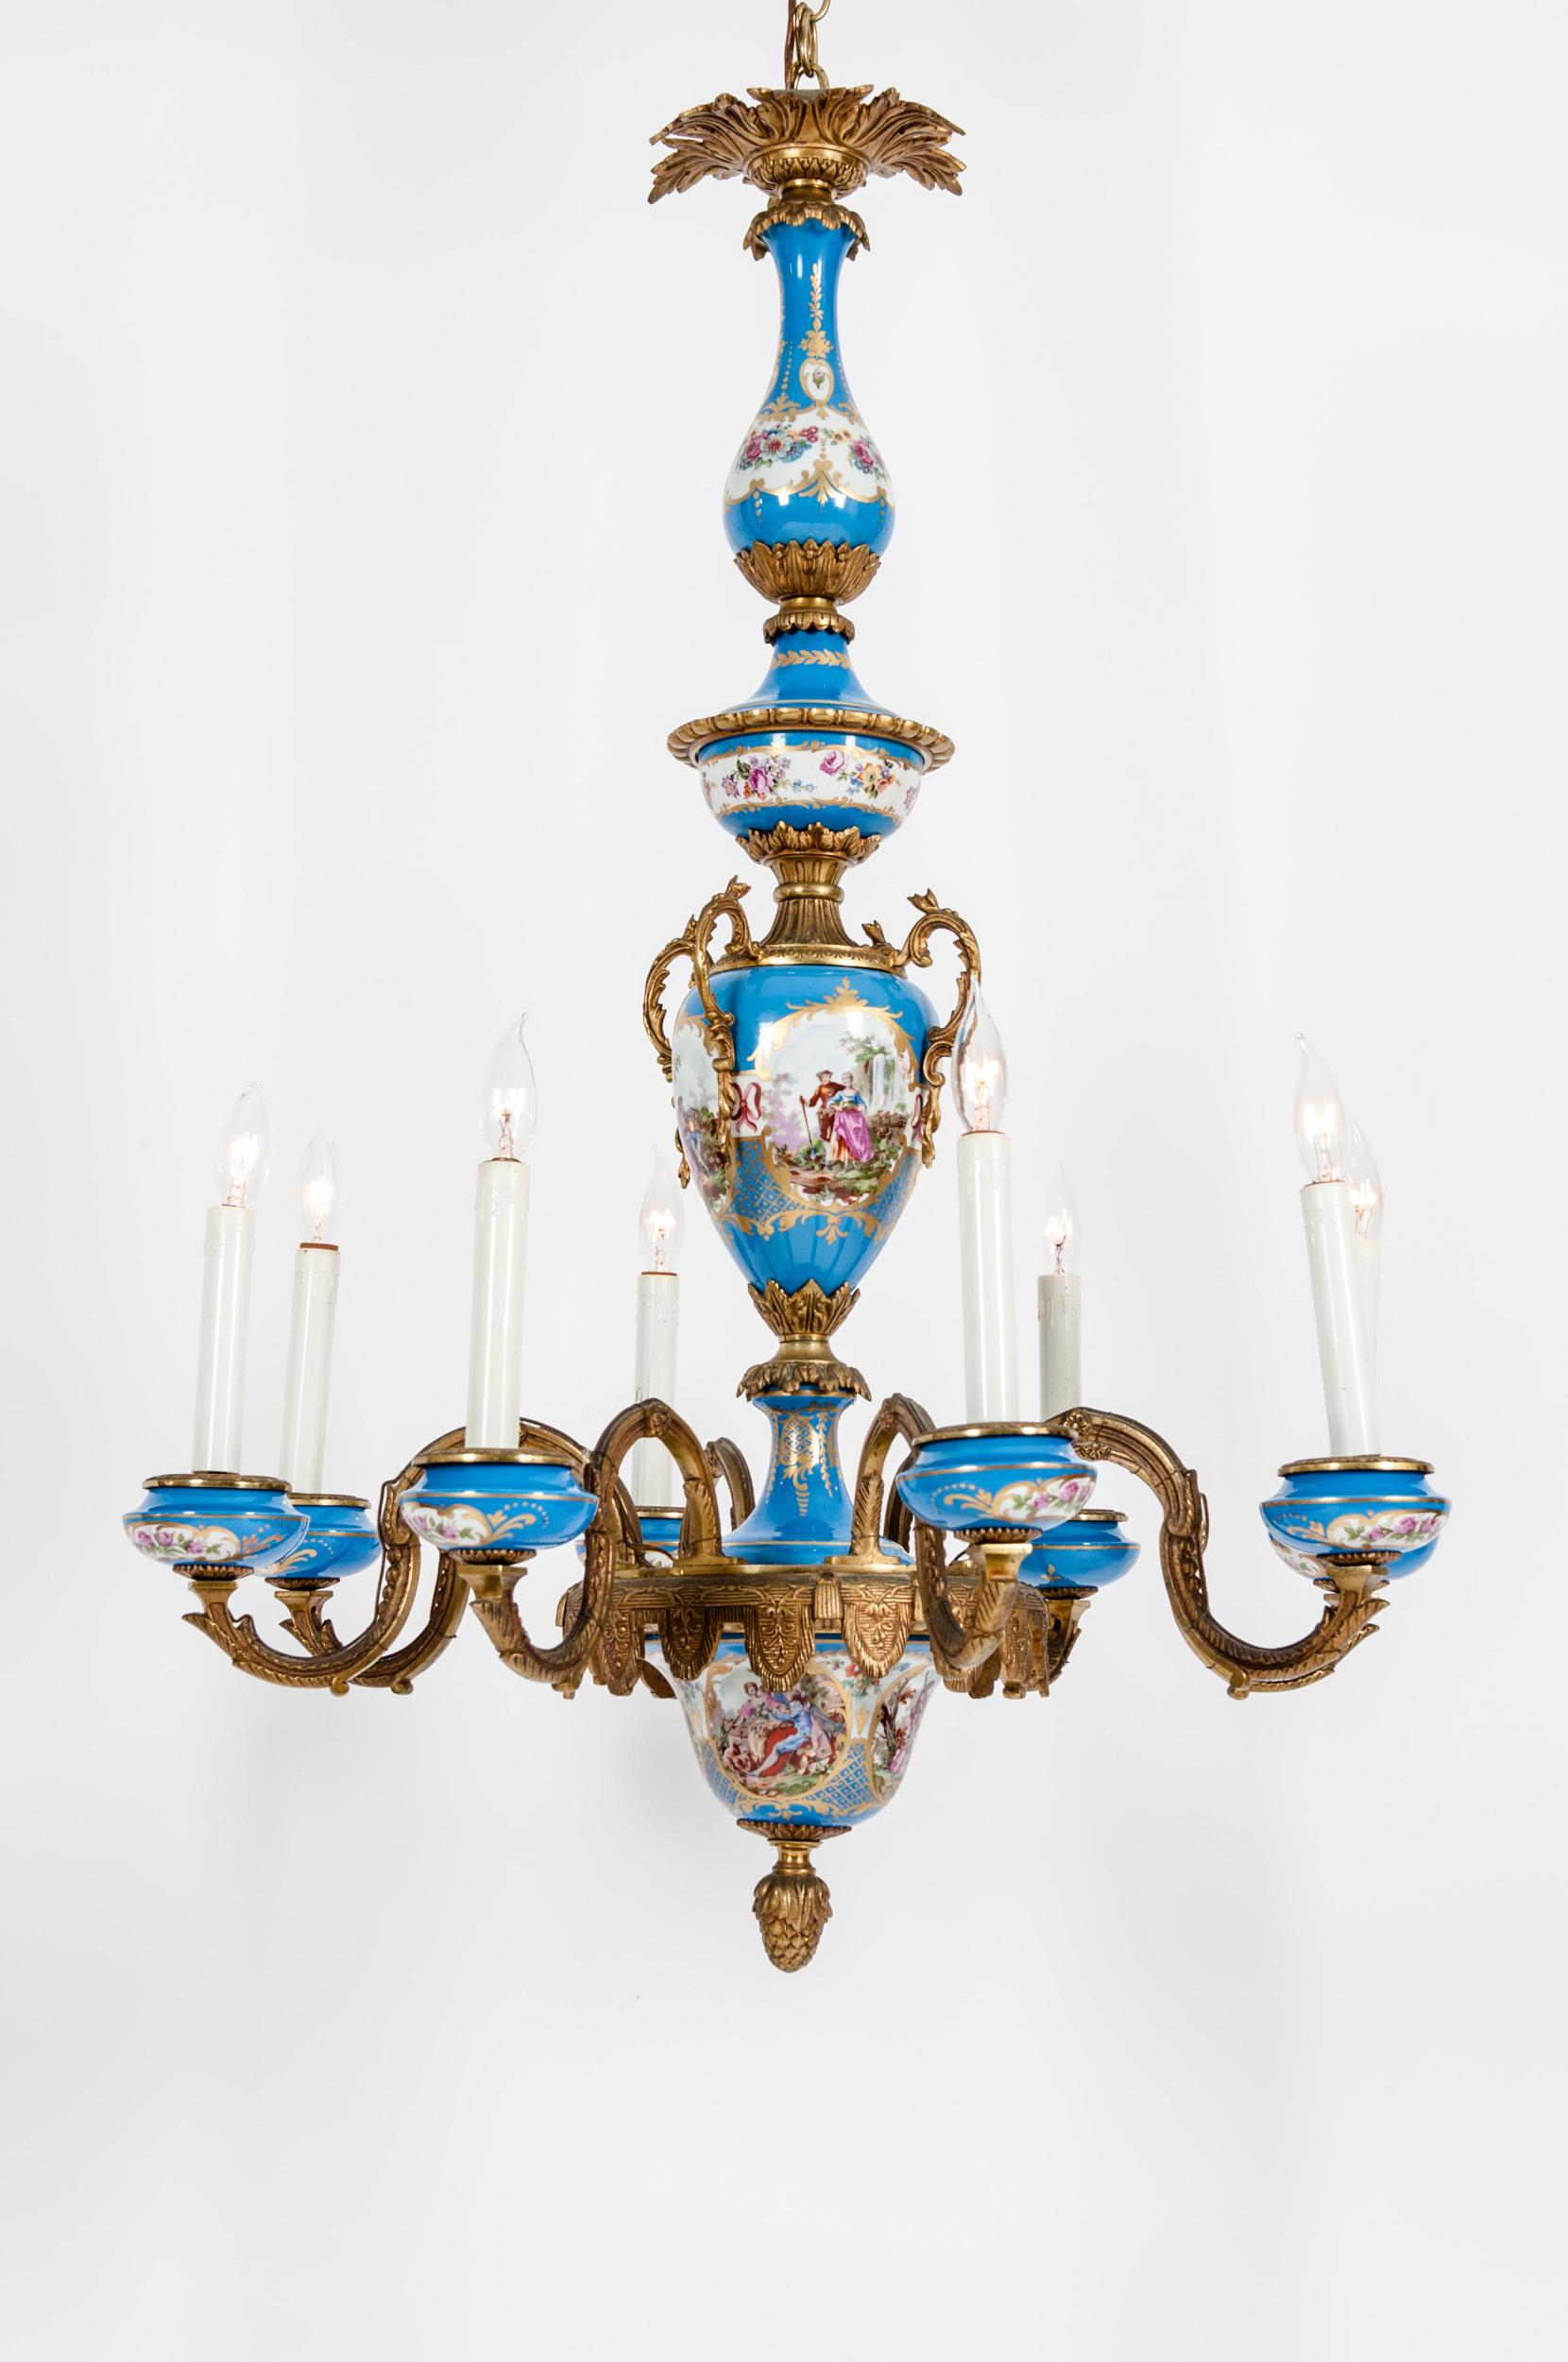 Bronze mounted / Sevres porcelain seven arm chandelier with exterior design details . The chandelier in in great working condition . Minor wear appropriate with use / age . Rewired for US use , no special light bulb required . The chandelier measure